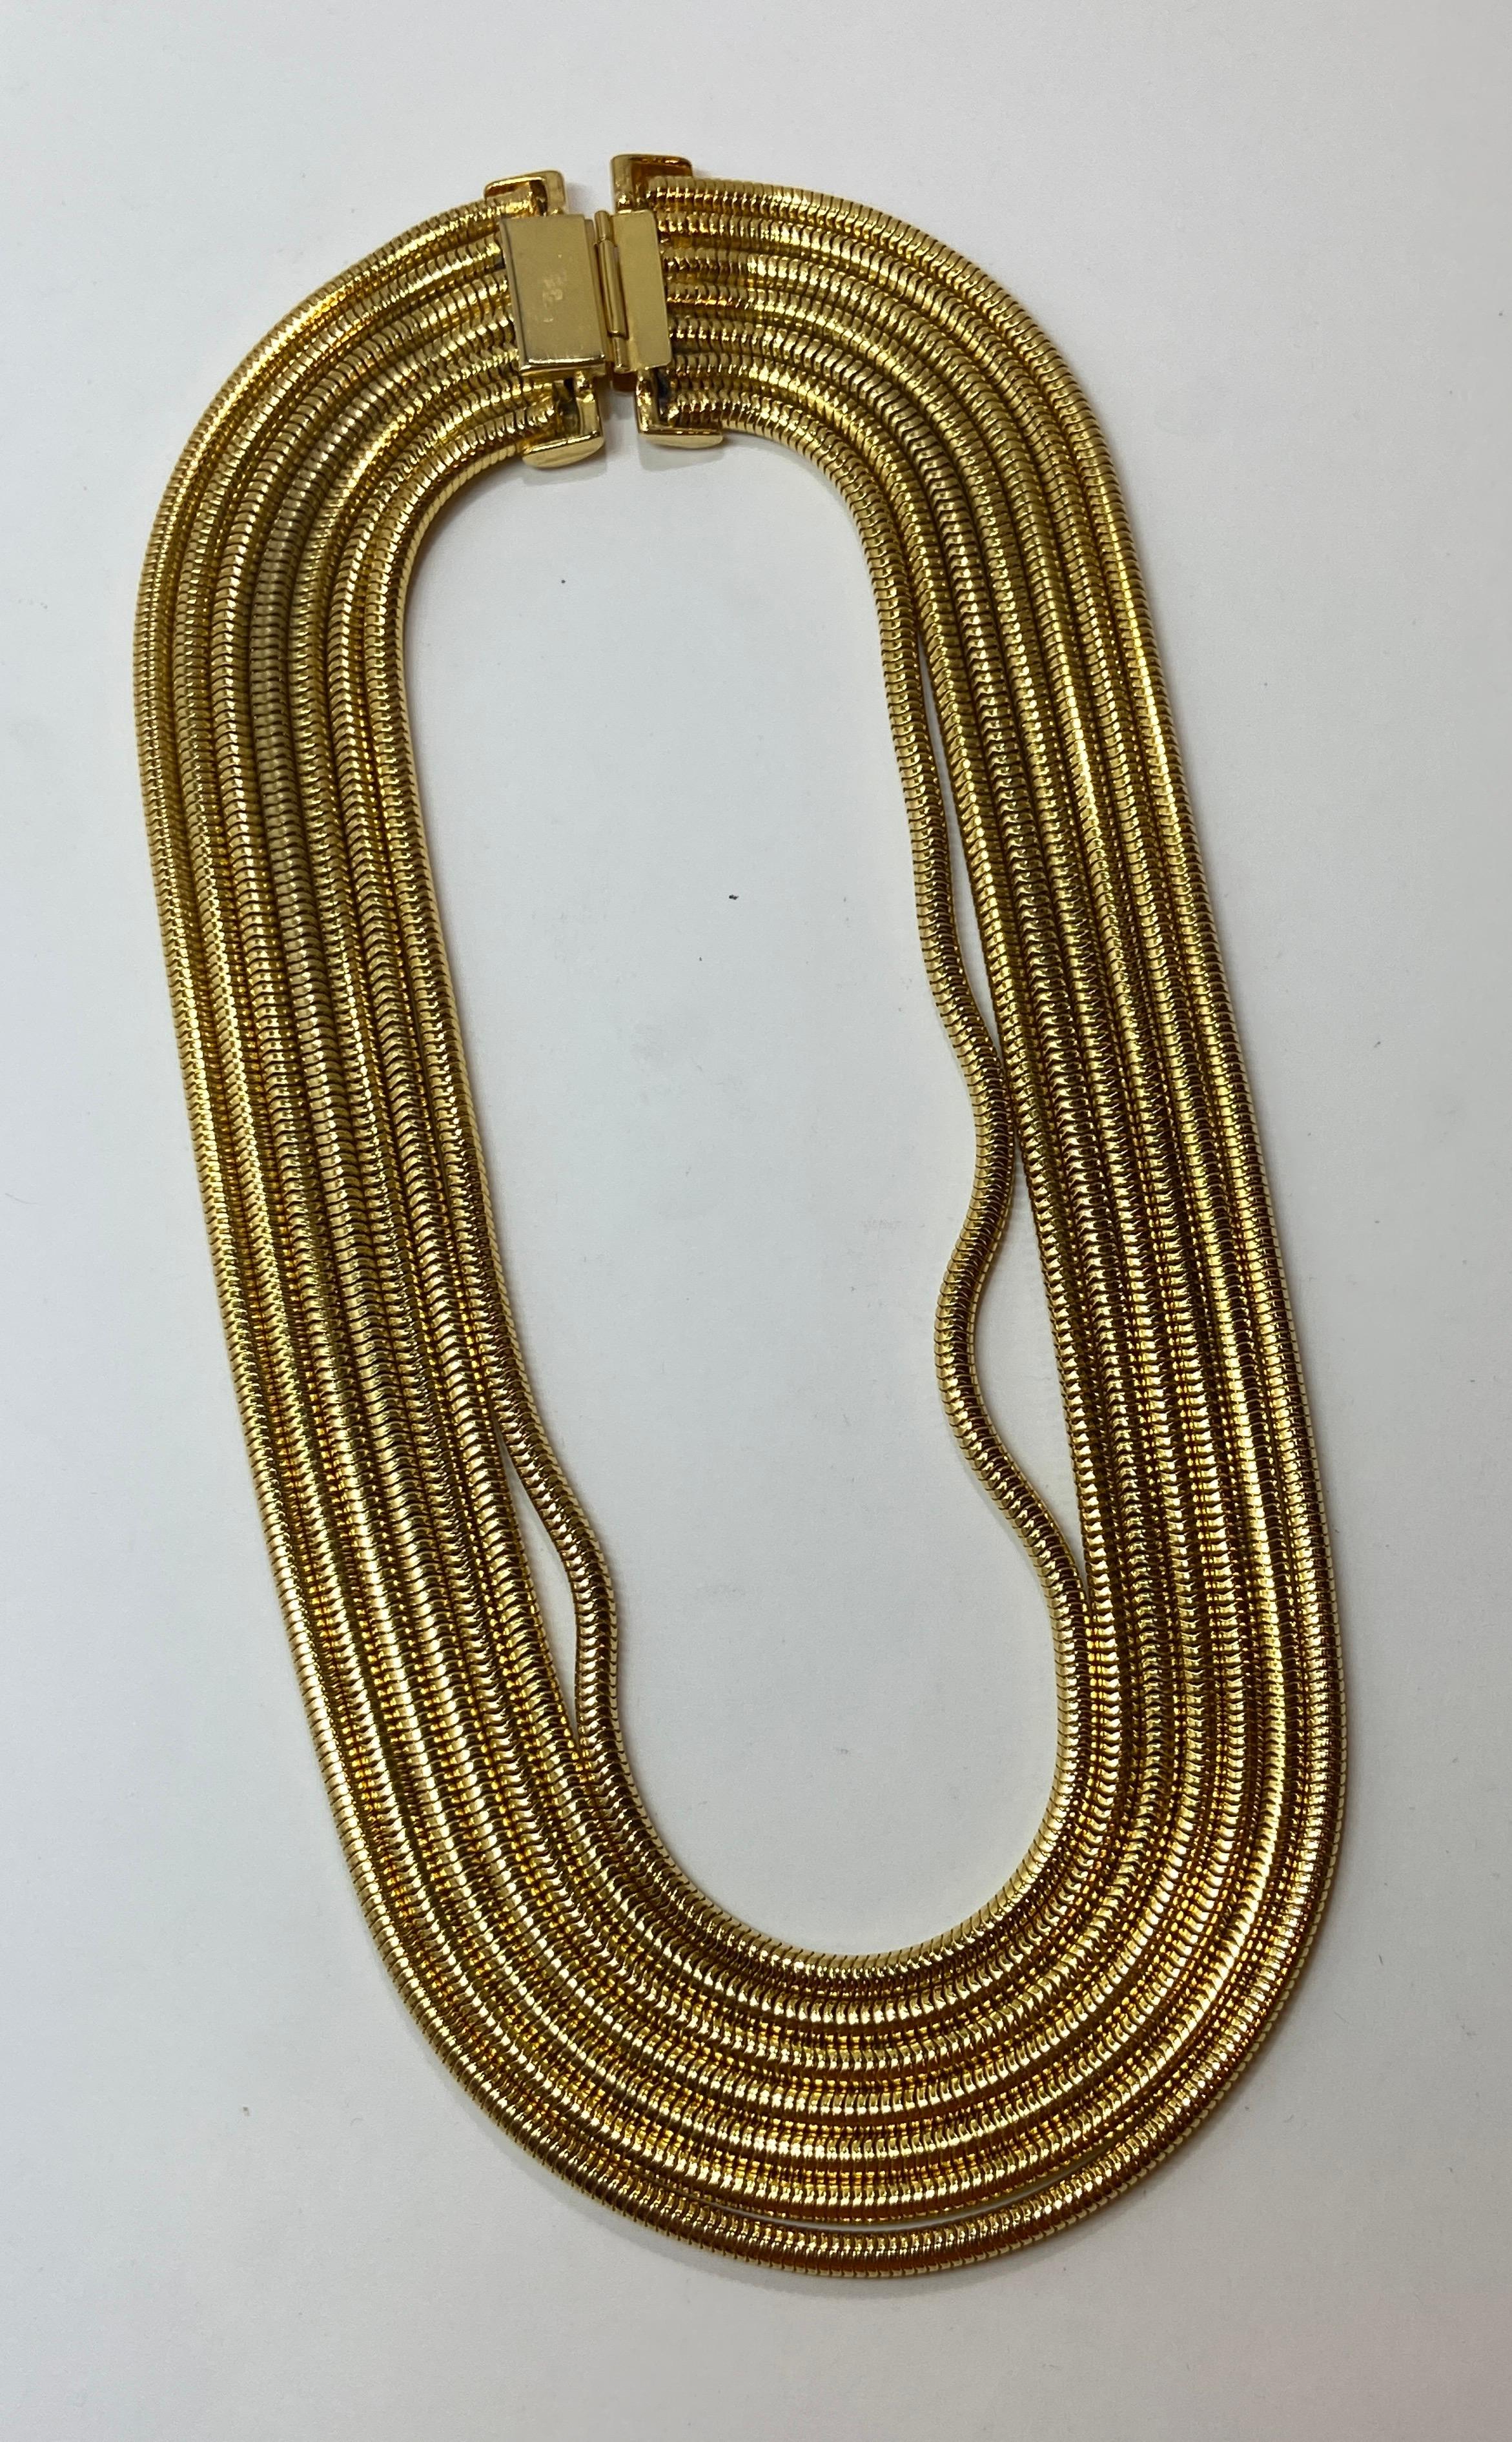 Multi-Linked Smooth Snake-Link Polished Gold Hardware Necklace In Good Condition For Sale In New York, NY